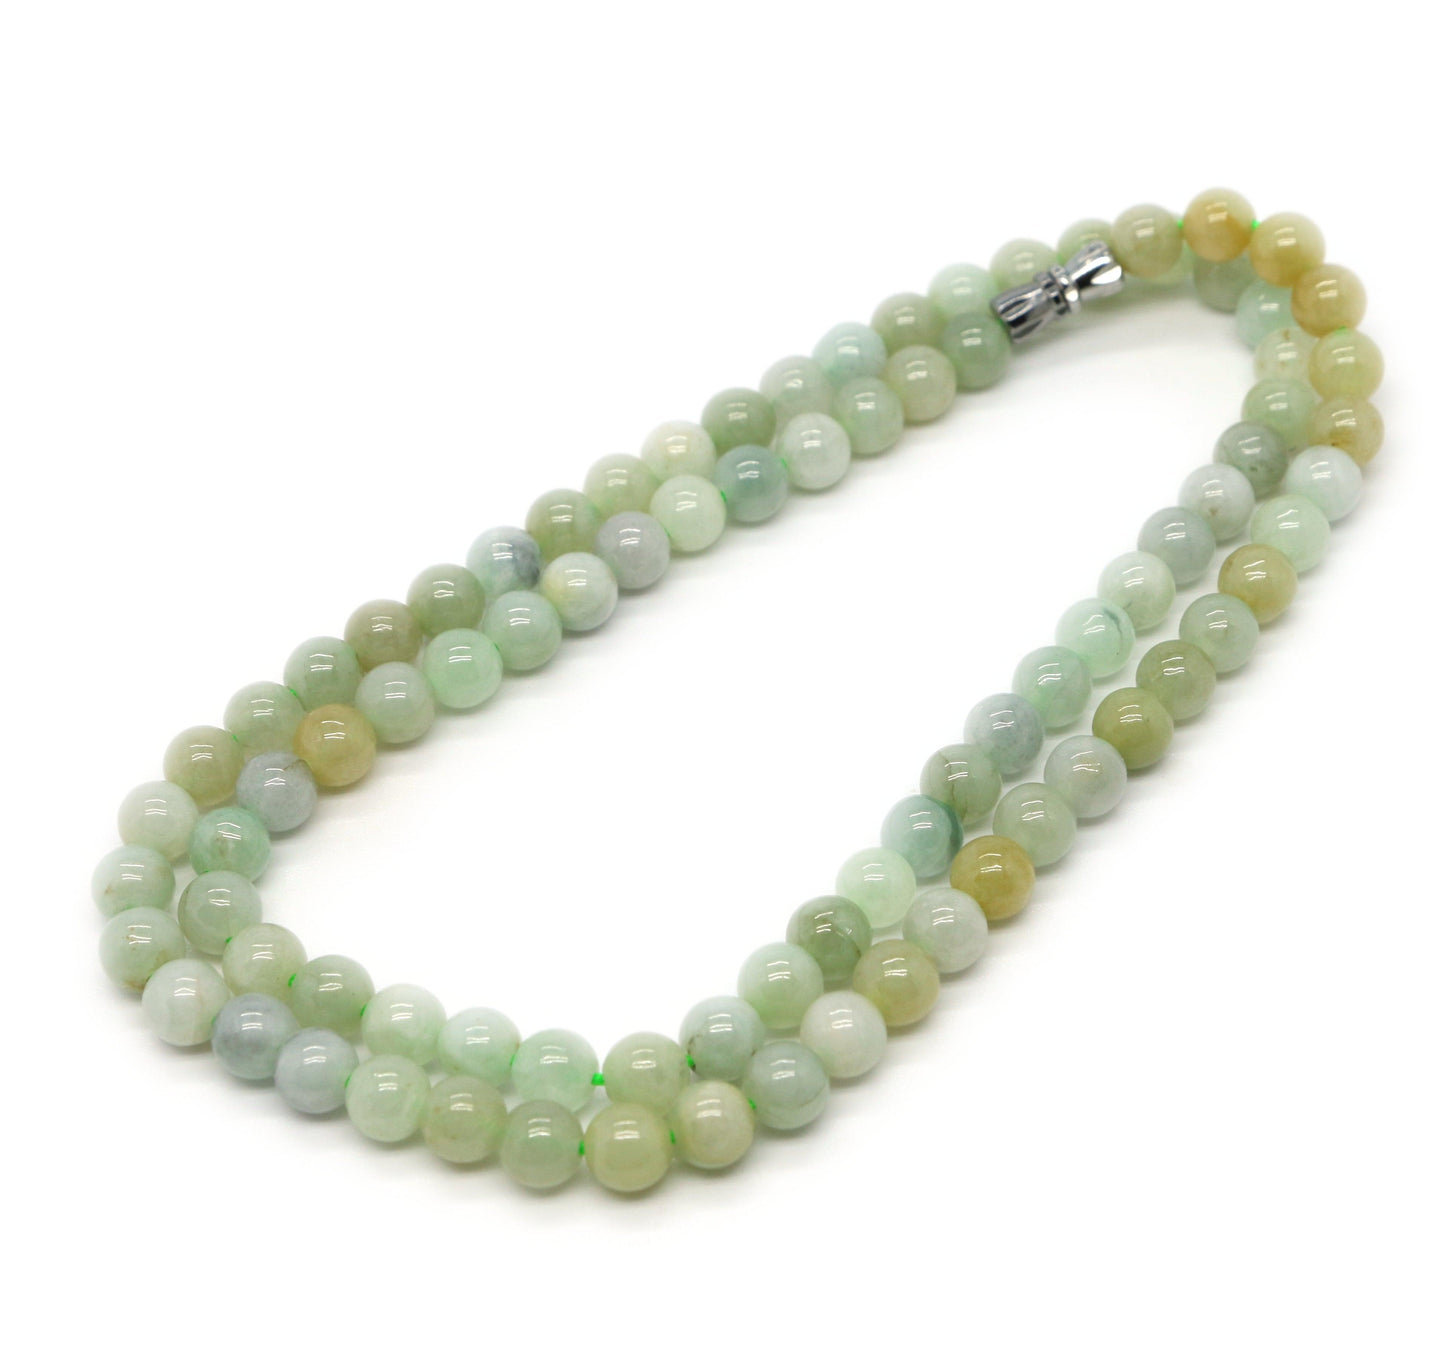 Type A Jadeite Jade Necklace Series (Fullfill USA only) B09L8G1TYD